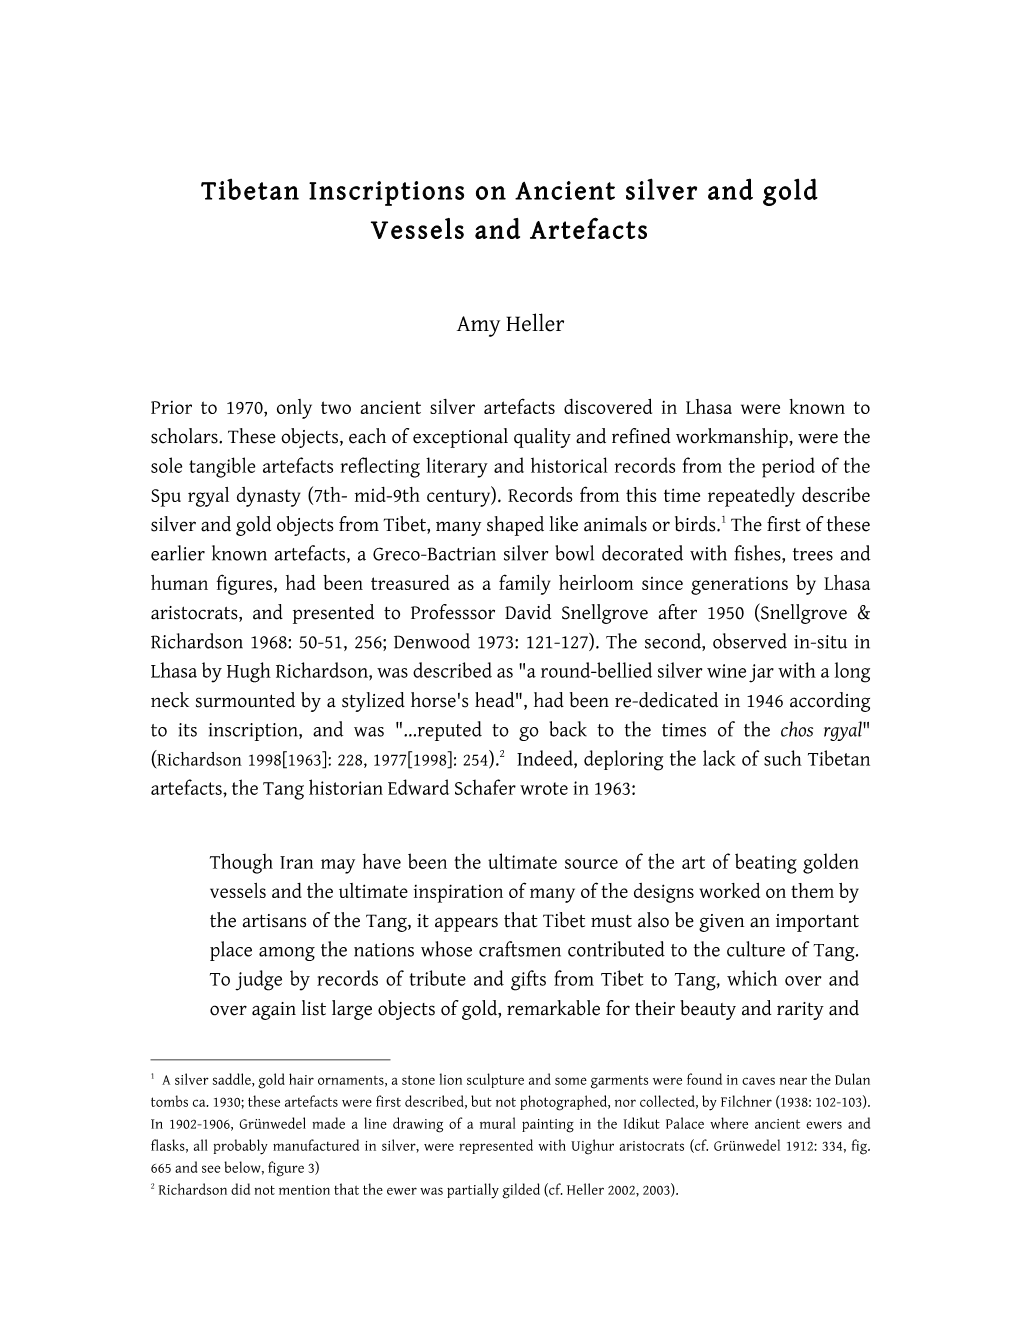 Tibetan Inscriptions on Ancient Silver and Gold Vessels and Artefacts